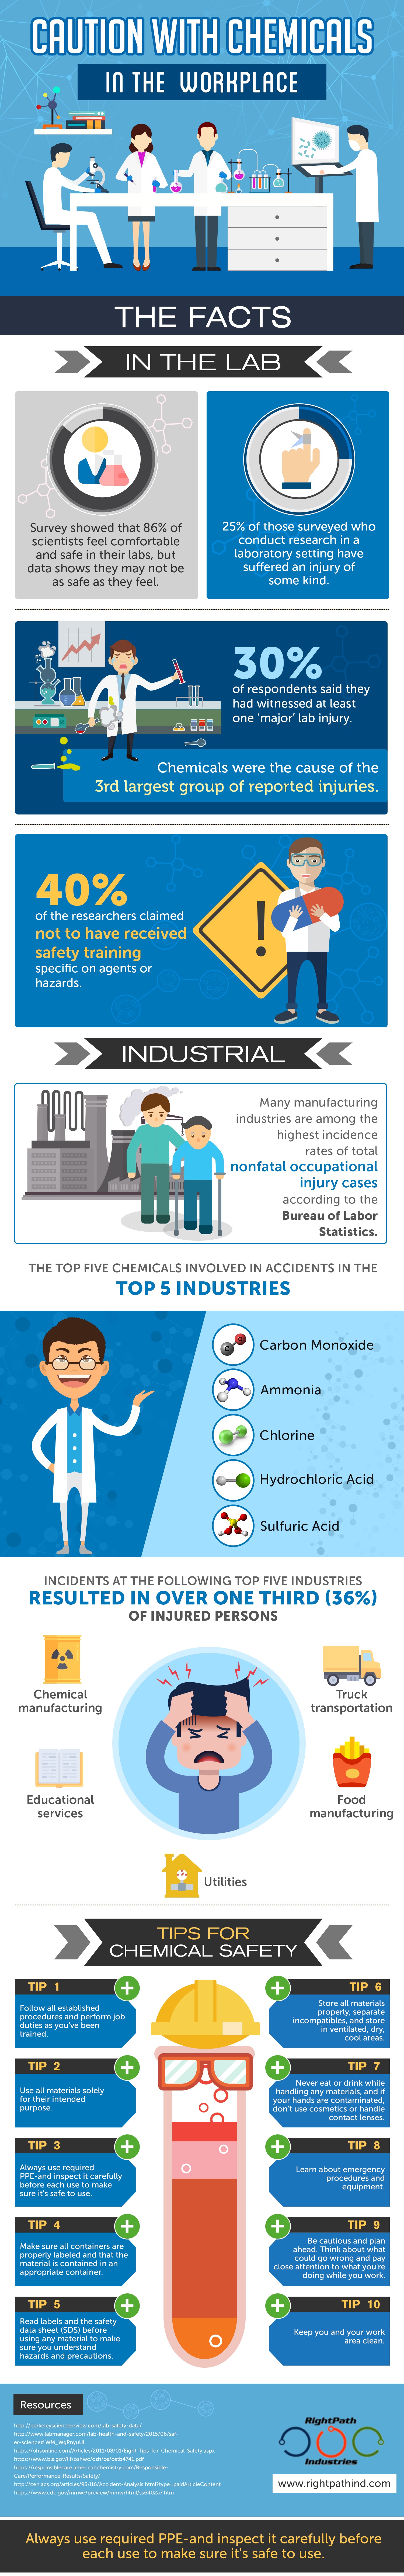 Caution-with-Chemicals-in-the-Workplace Caution with Chemicals in the Workplace